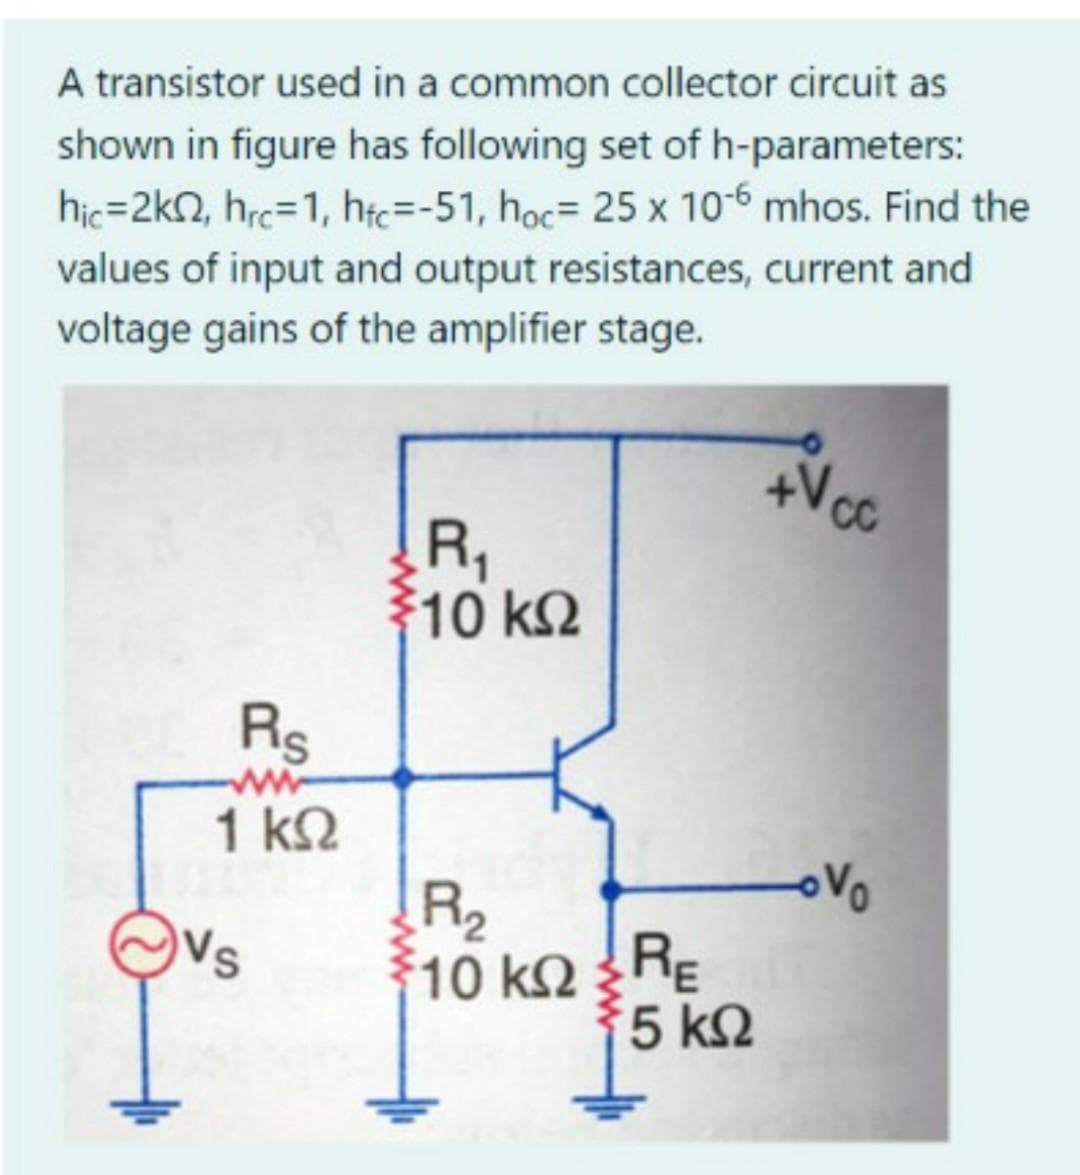 A transistor used in a common collector circuit as
shown in figure has following set of h-parameters:
hic=2kN, hrc=1, htc=-51, hoc= 25 x 10-6 mhos. Find the
values of input and output resistances, current and
voltage gains of the amplifier stage.
R,
우10 k2
Rs
ww
1 k2
R2
10 kRE
5 k2
